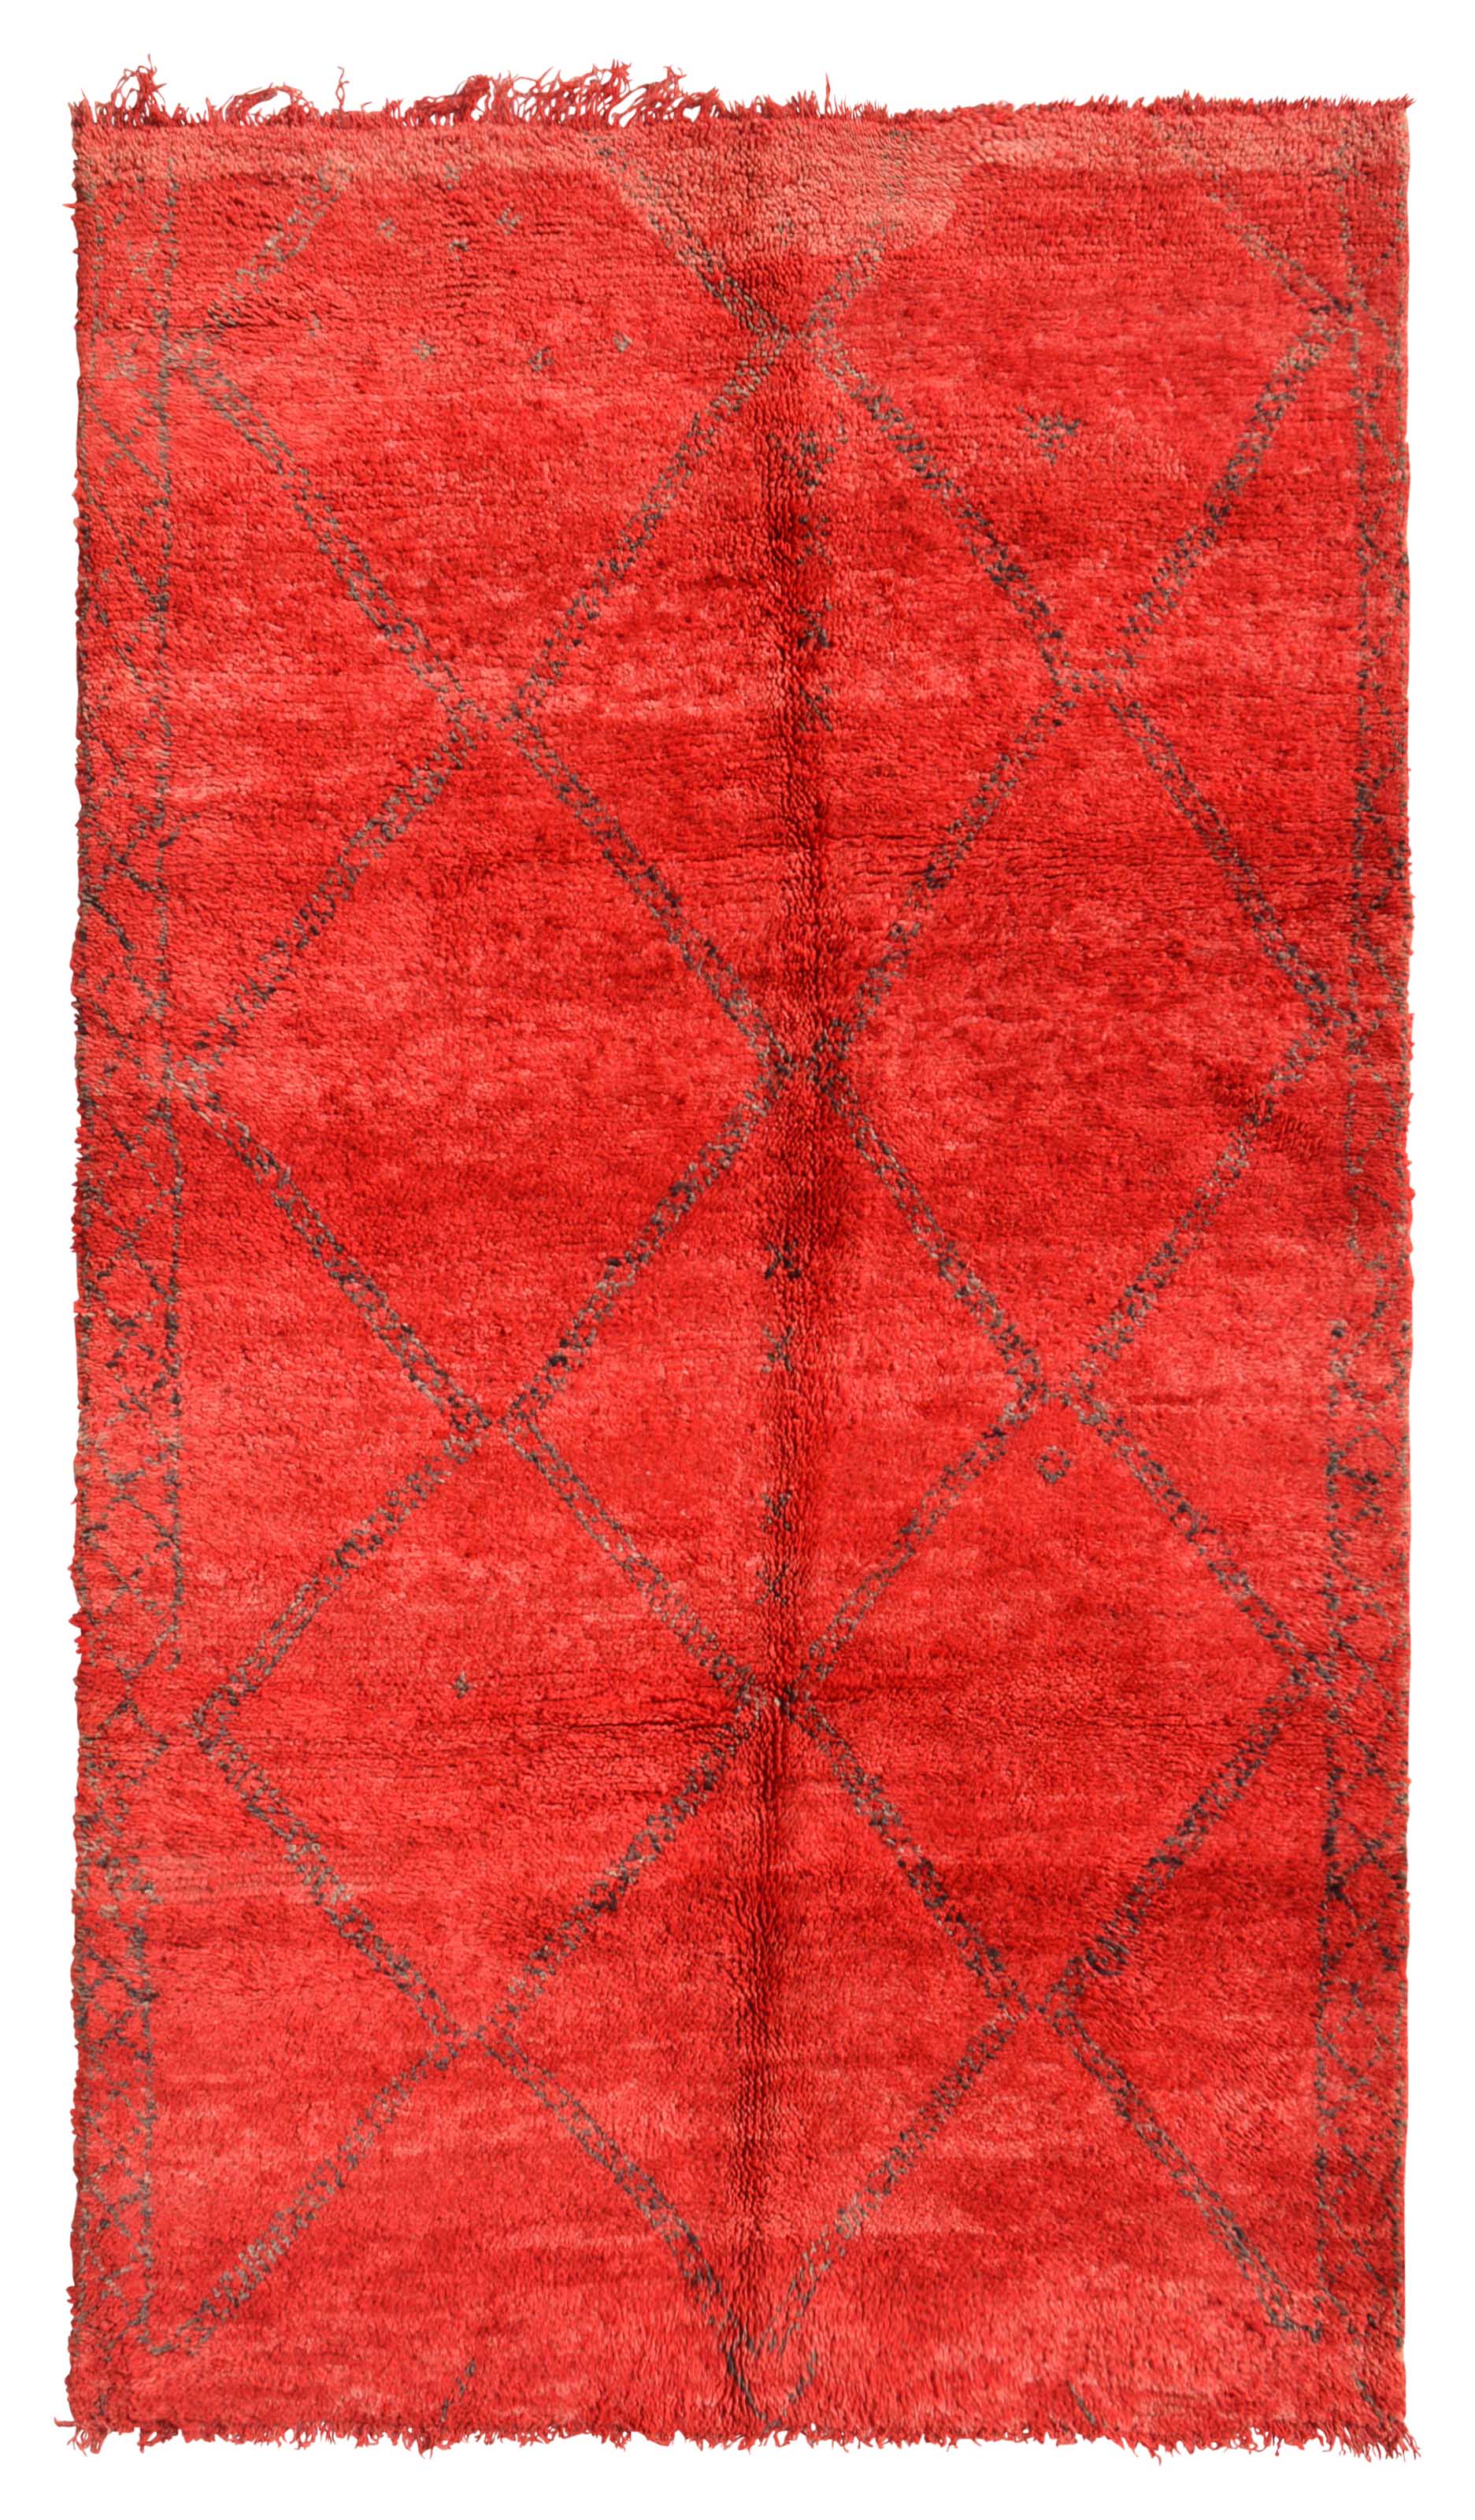 Vintage Moroccan Rug Vintage Shag Rug - Red Beni Ourian Rug - Illuminate Collective Illuminate Collective